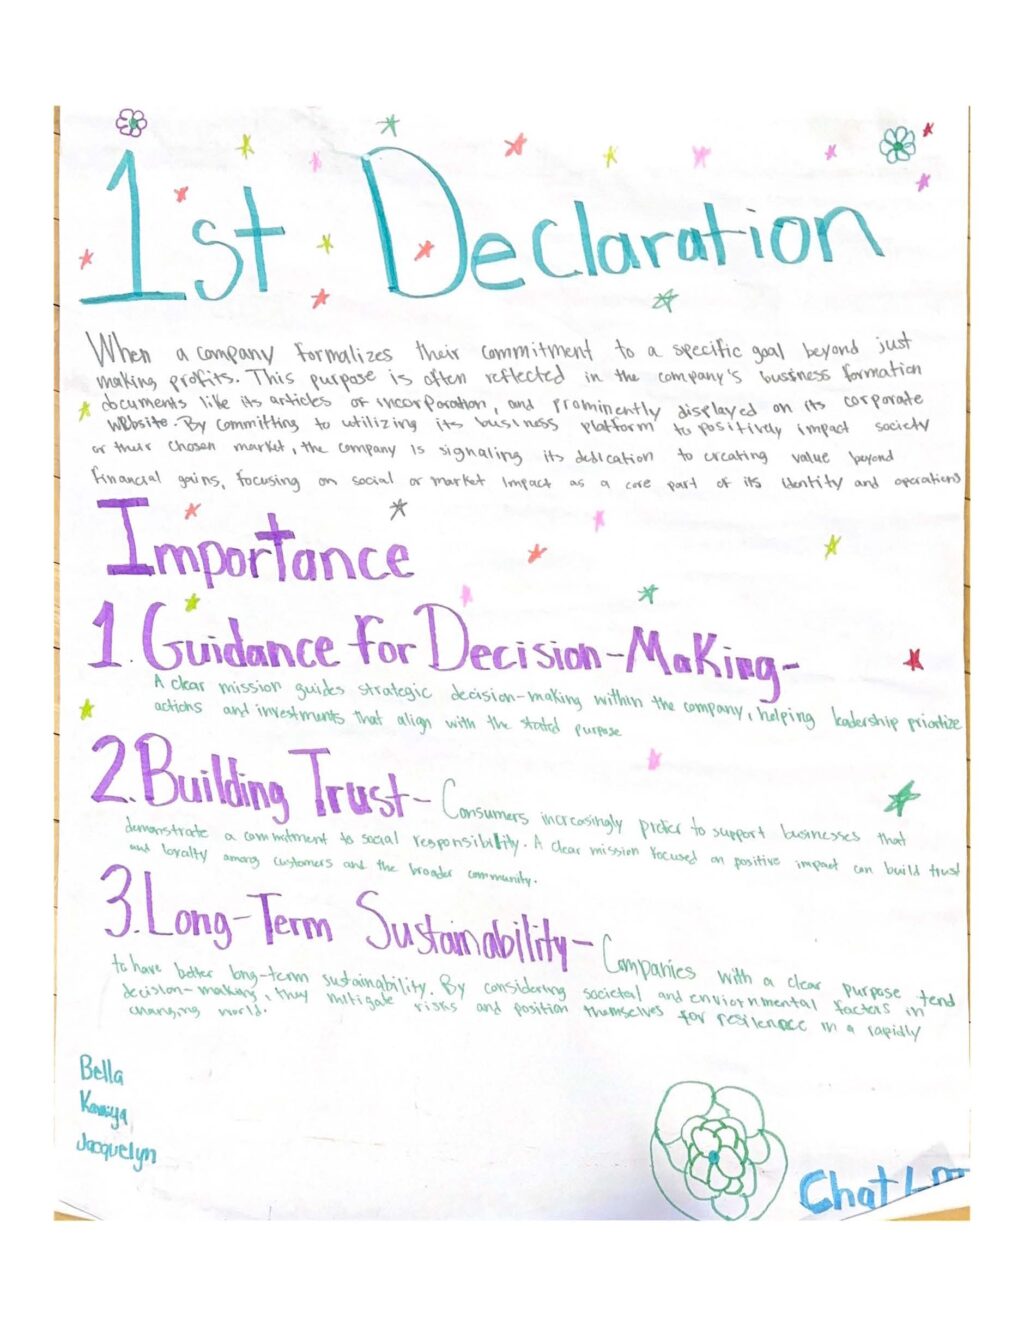 Handwritten note highlighting the basic ideas behind declaration one from the book, "The Mission Corporation: How contemporary capitalism can change the world one business at a time"